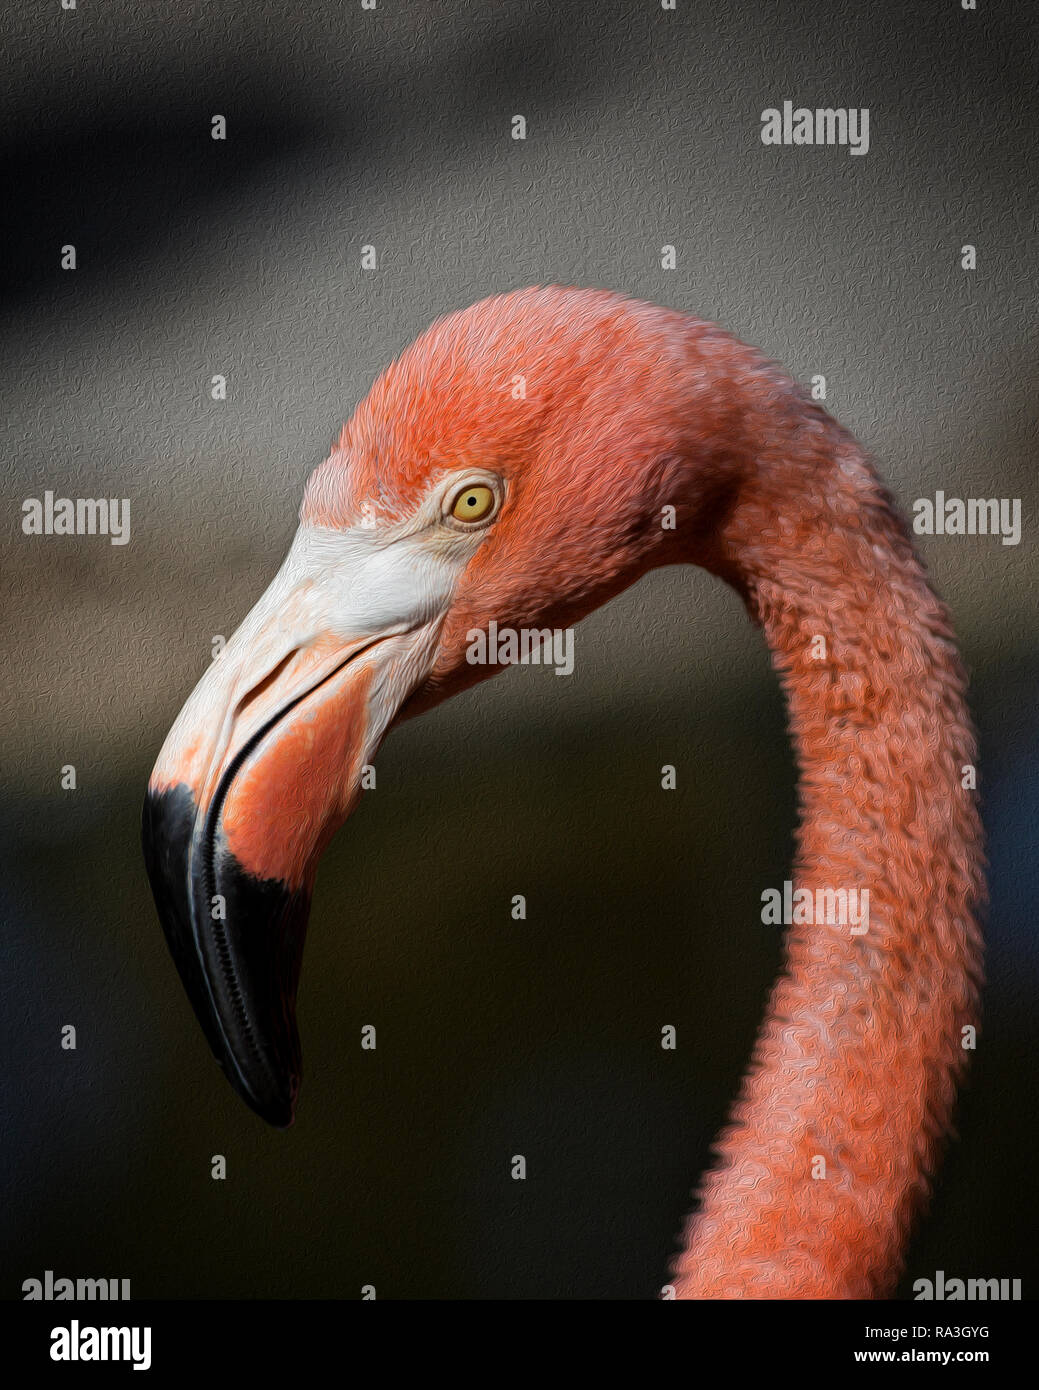 Portrait of Adult American Flamingo (Phoenicopterus ruber) with Oil Paint Texture Stock Photo